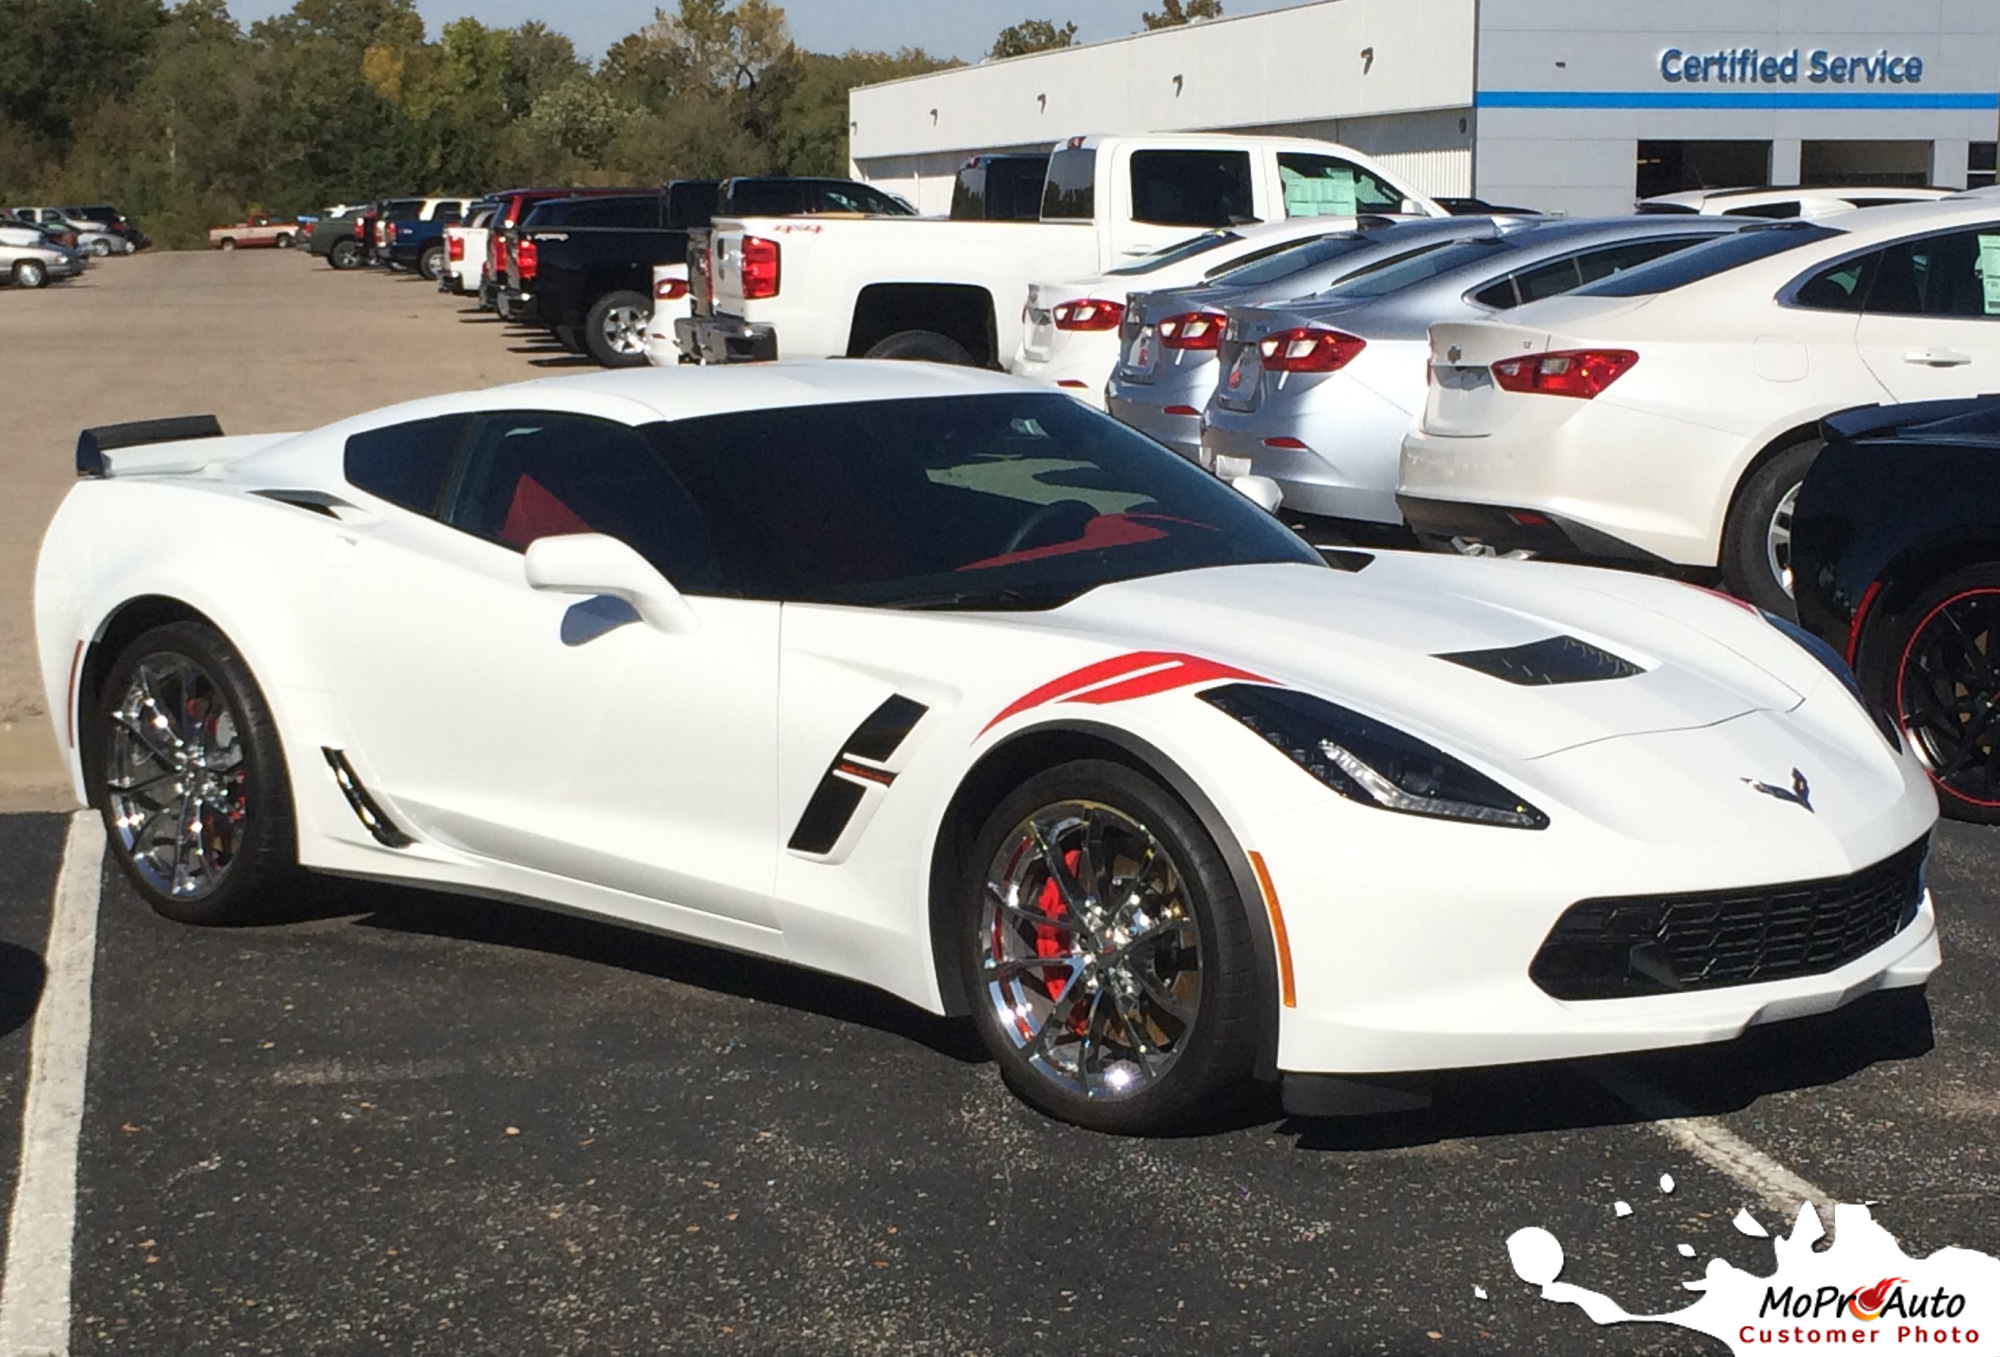 Chevy Corvette C7 Vinyl Graphics Stripes Striping and Decal Kits for 2014 2015 2016 2017 2018 2019 Models